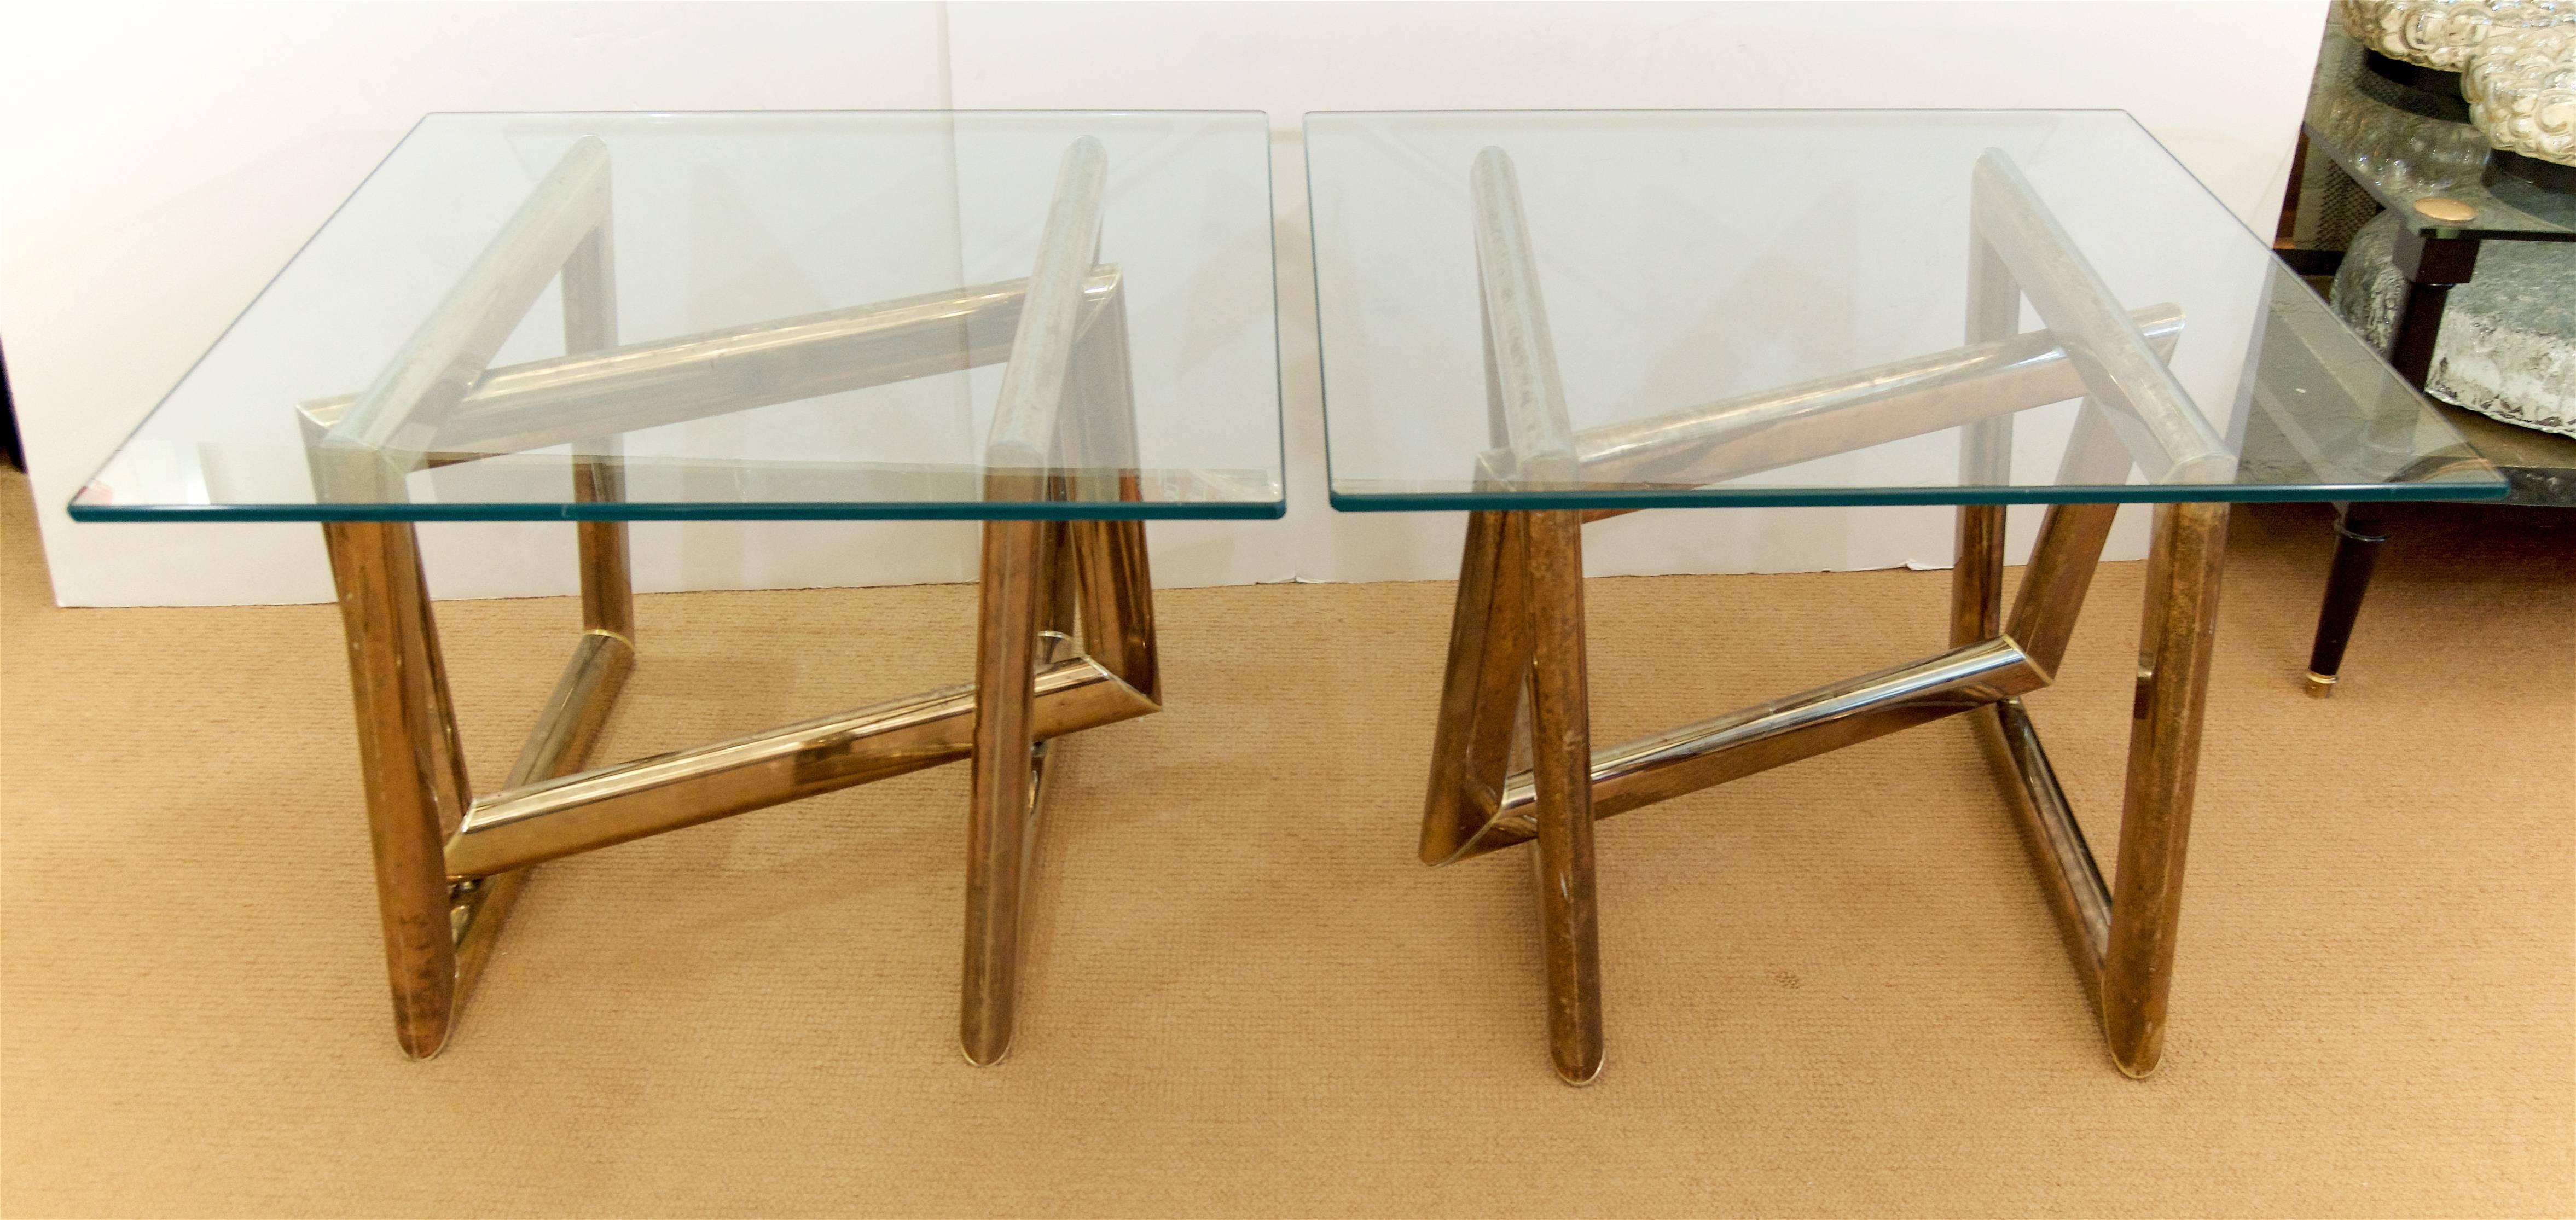 Pair of Brass Sculptural Side Tables with Glass Tops In Good Condition For Sale In Stamford, CT